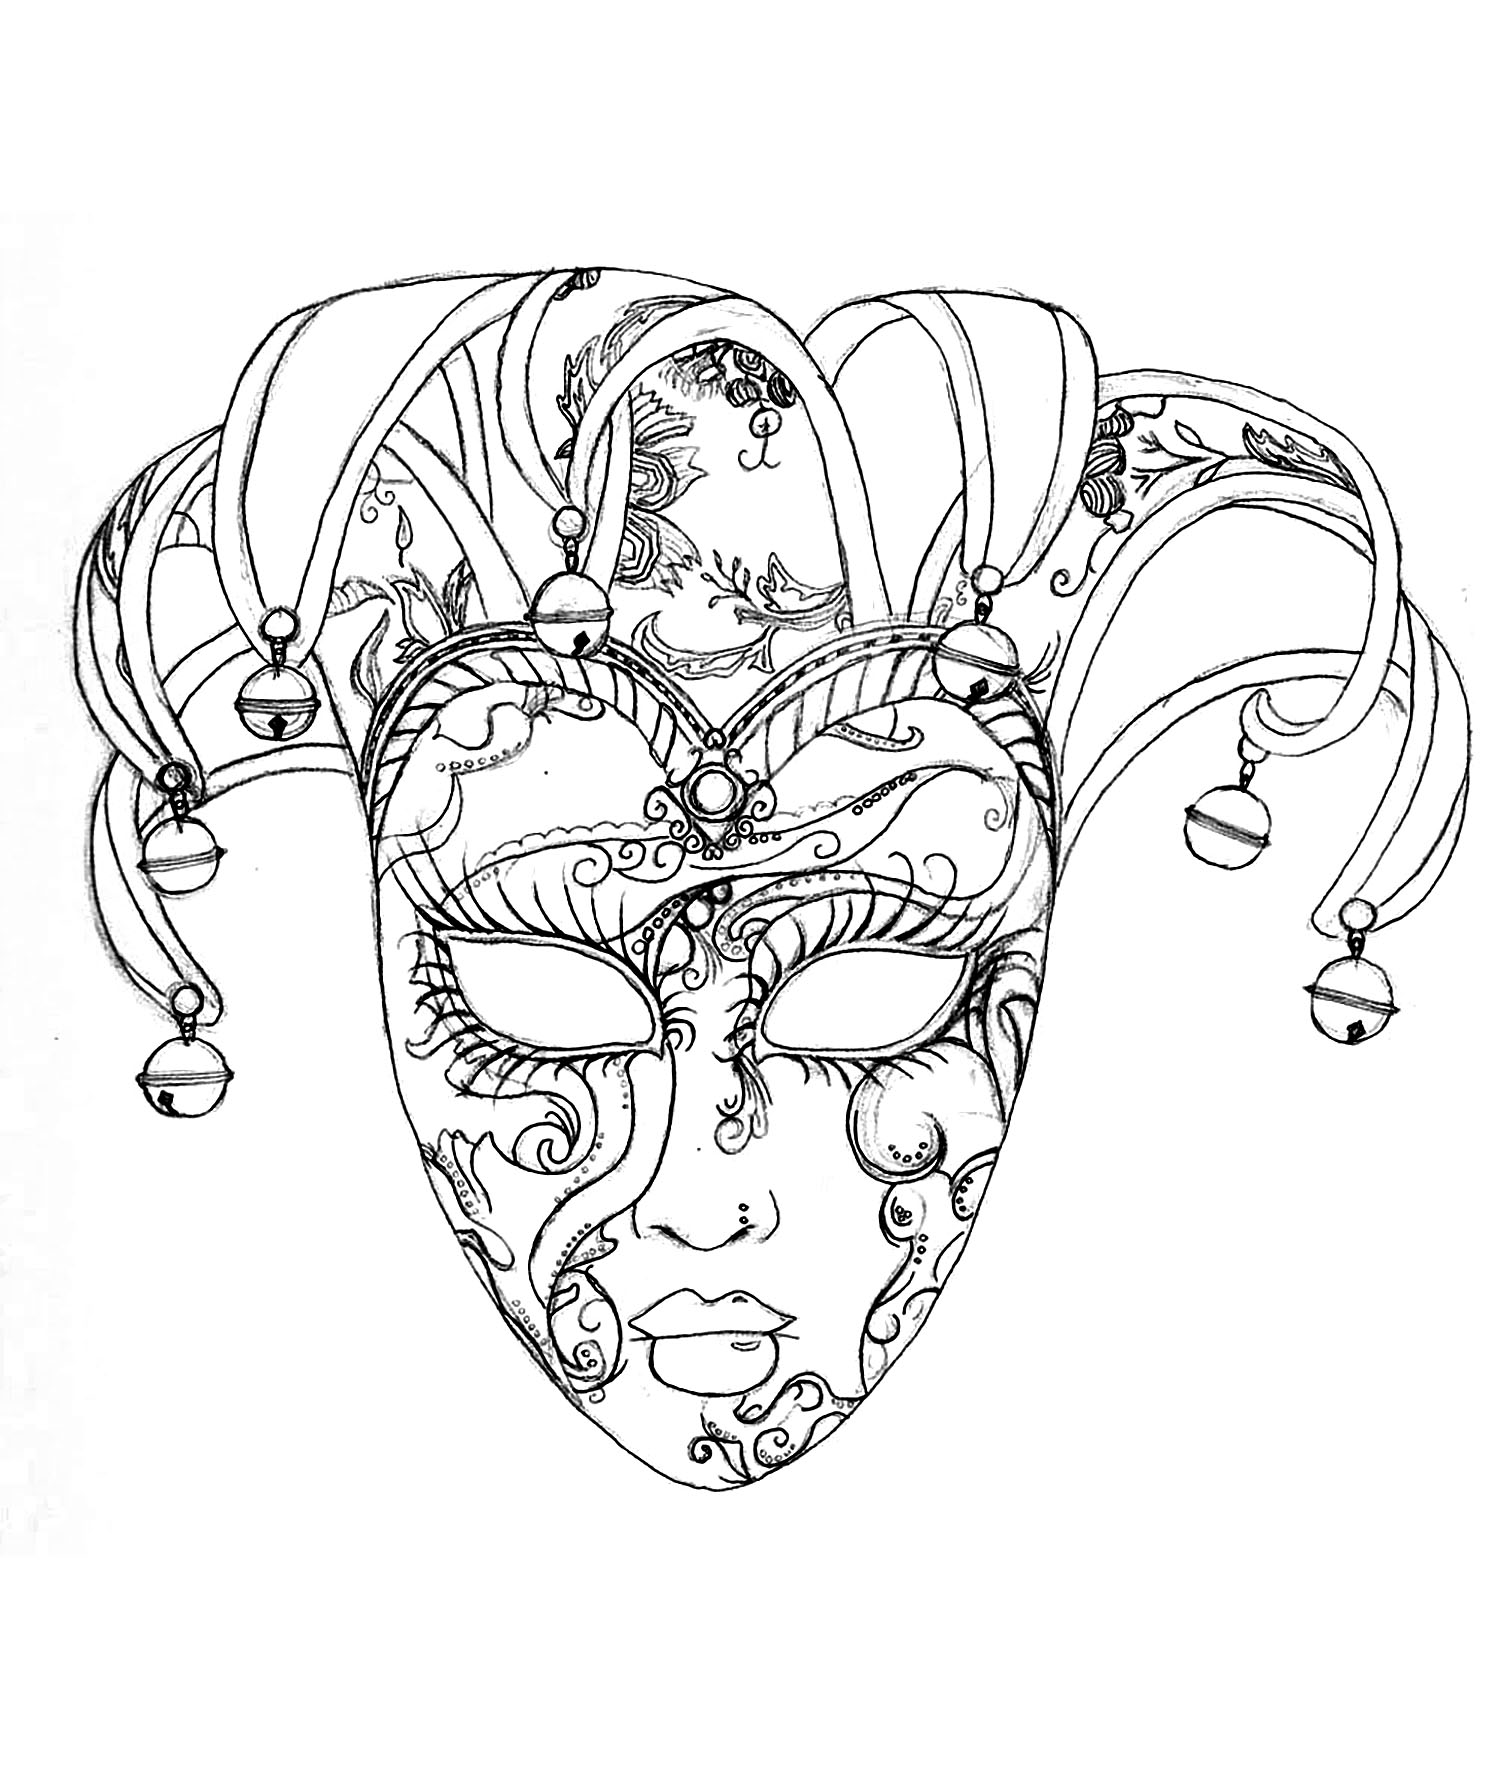 Masks coloring page with few details for kids